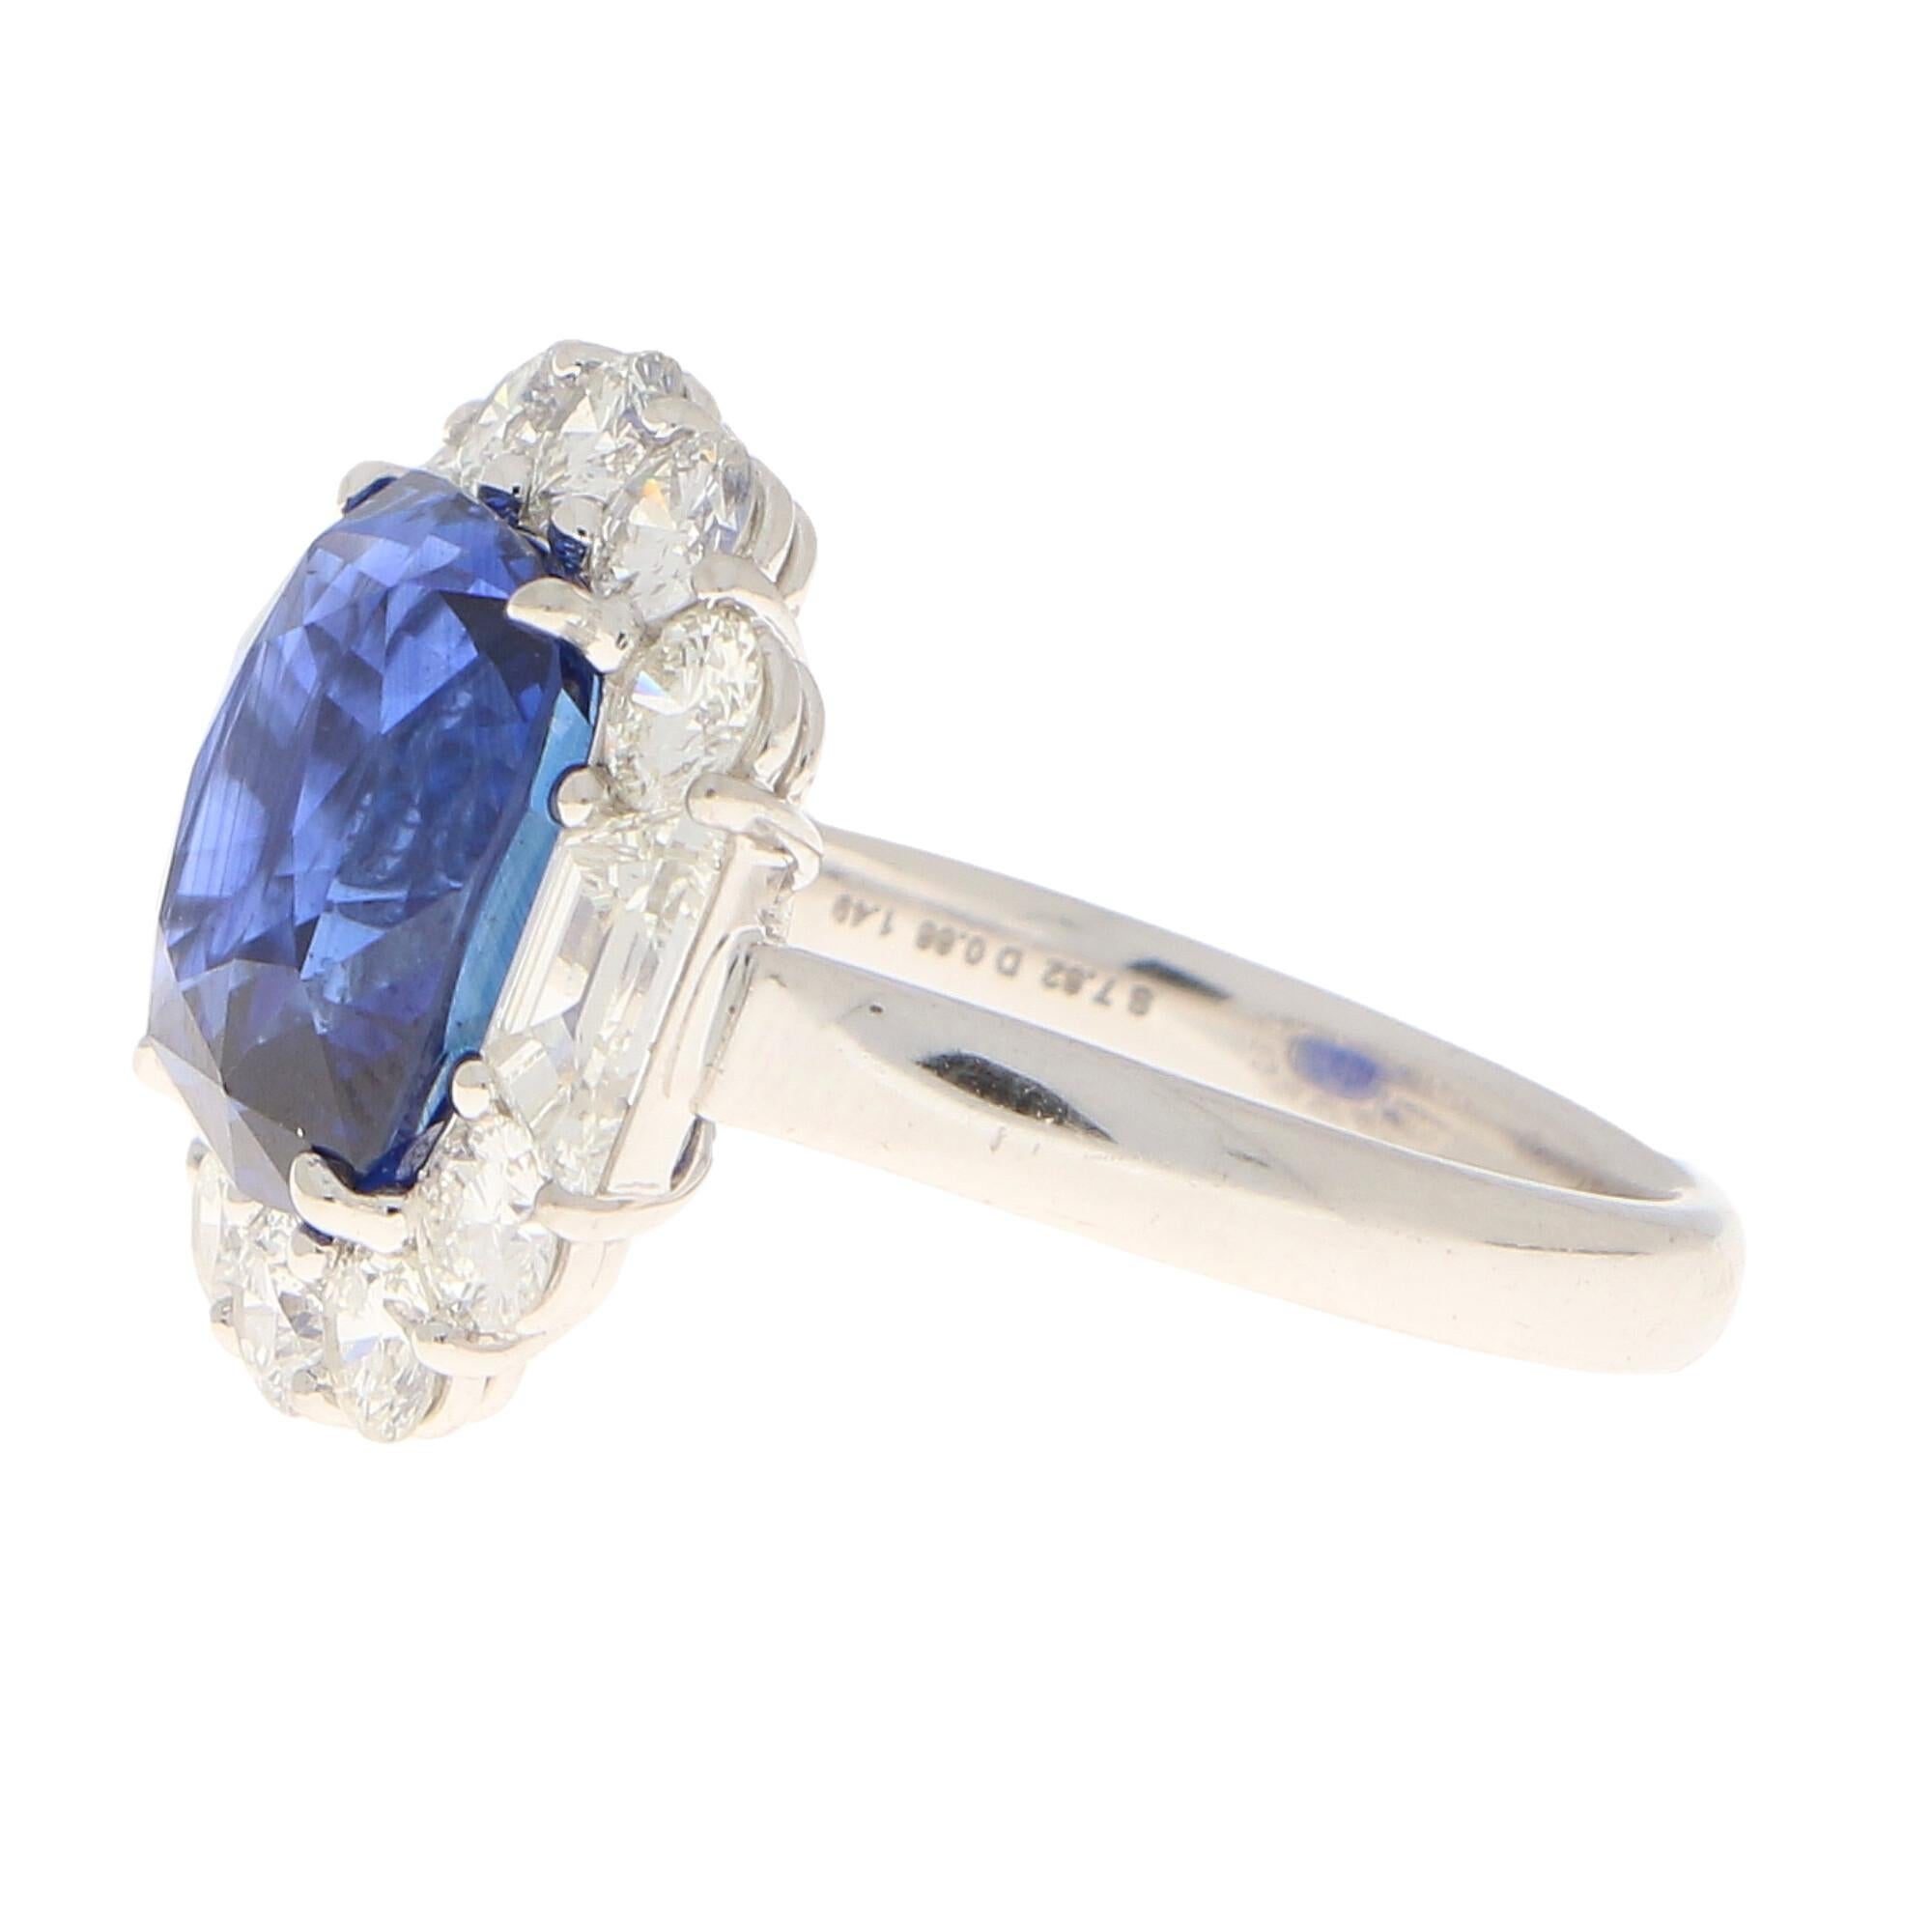 Cushion Cut Art Deco Style 7.62 Carat Blue Sapphire and Diamond Cluster Ring Set in Platinum